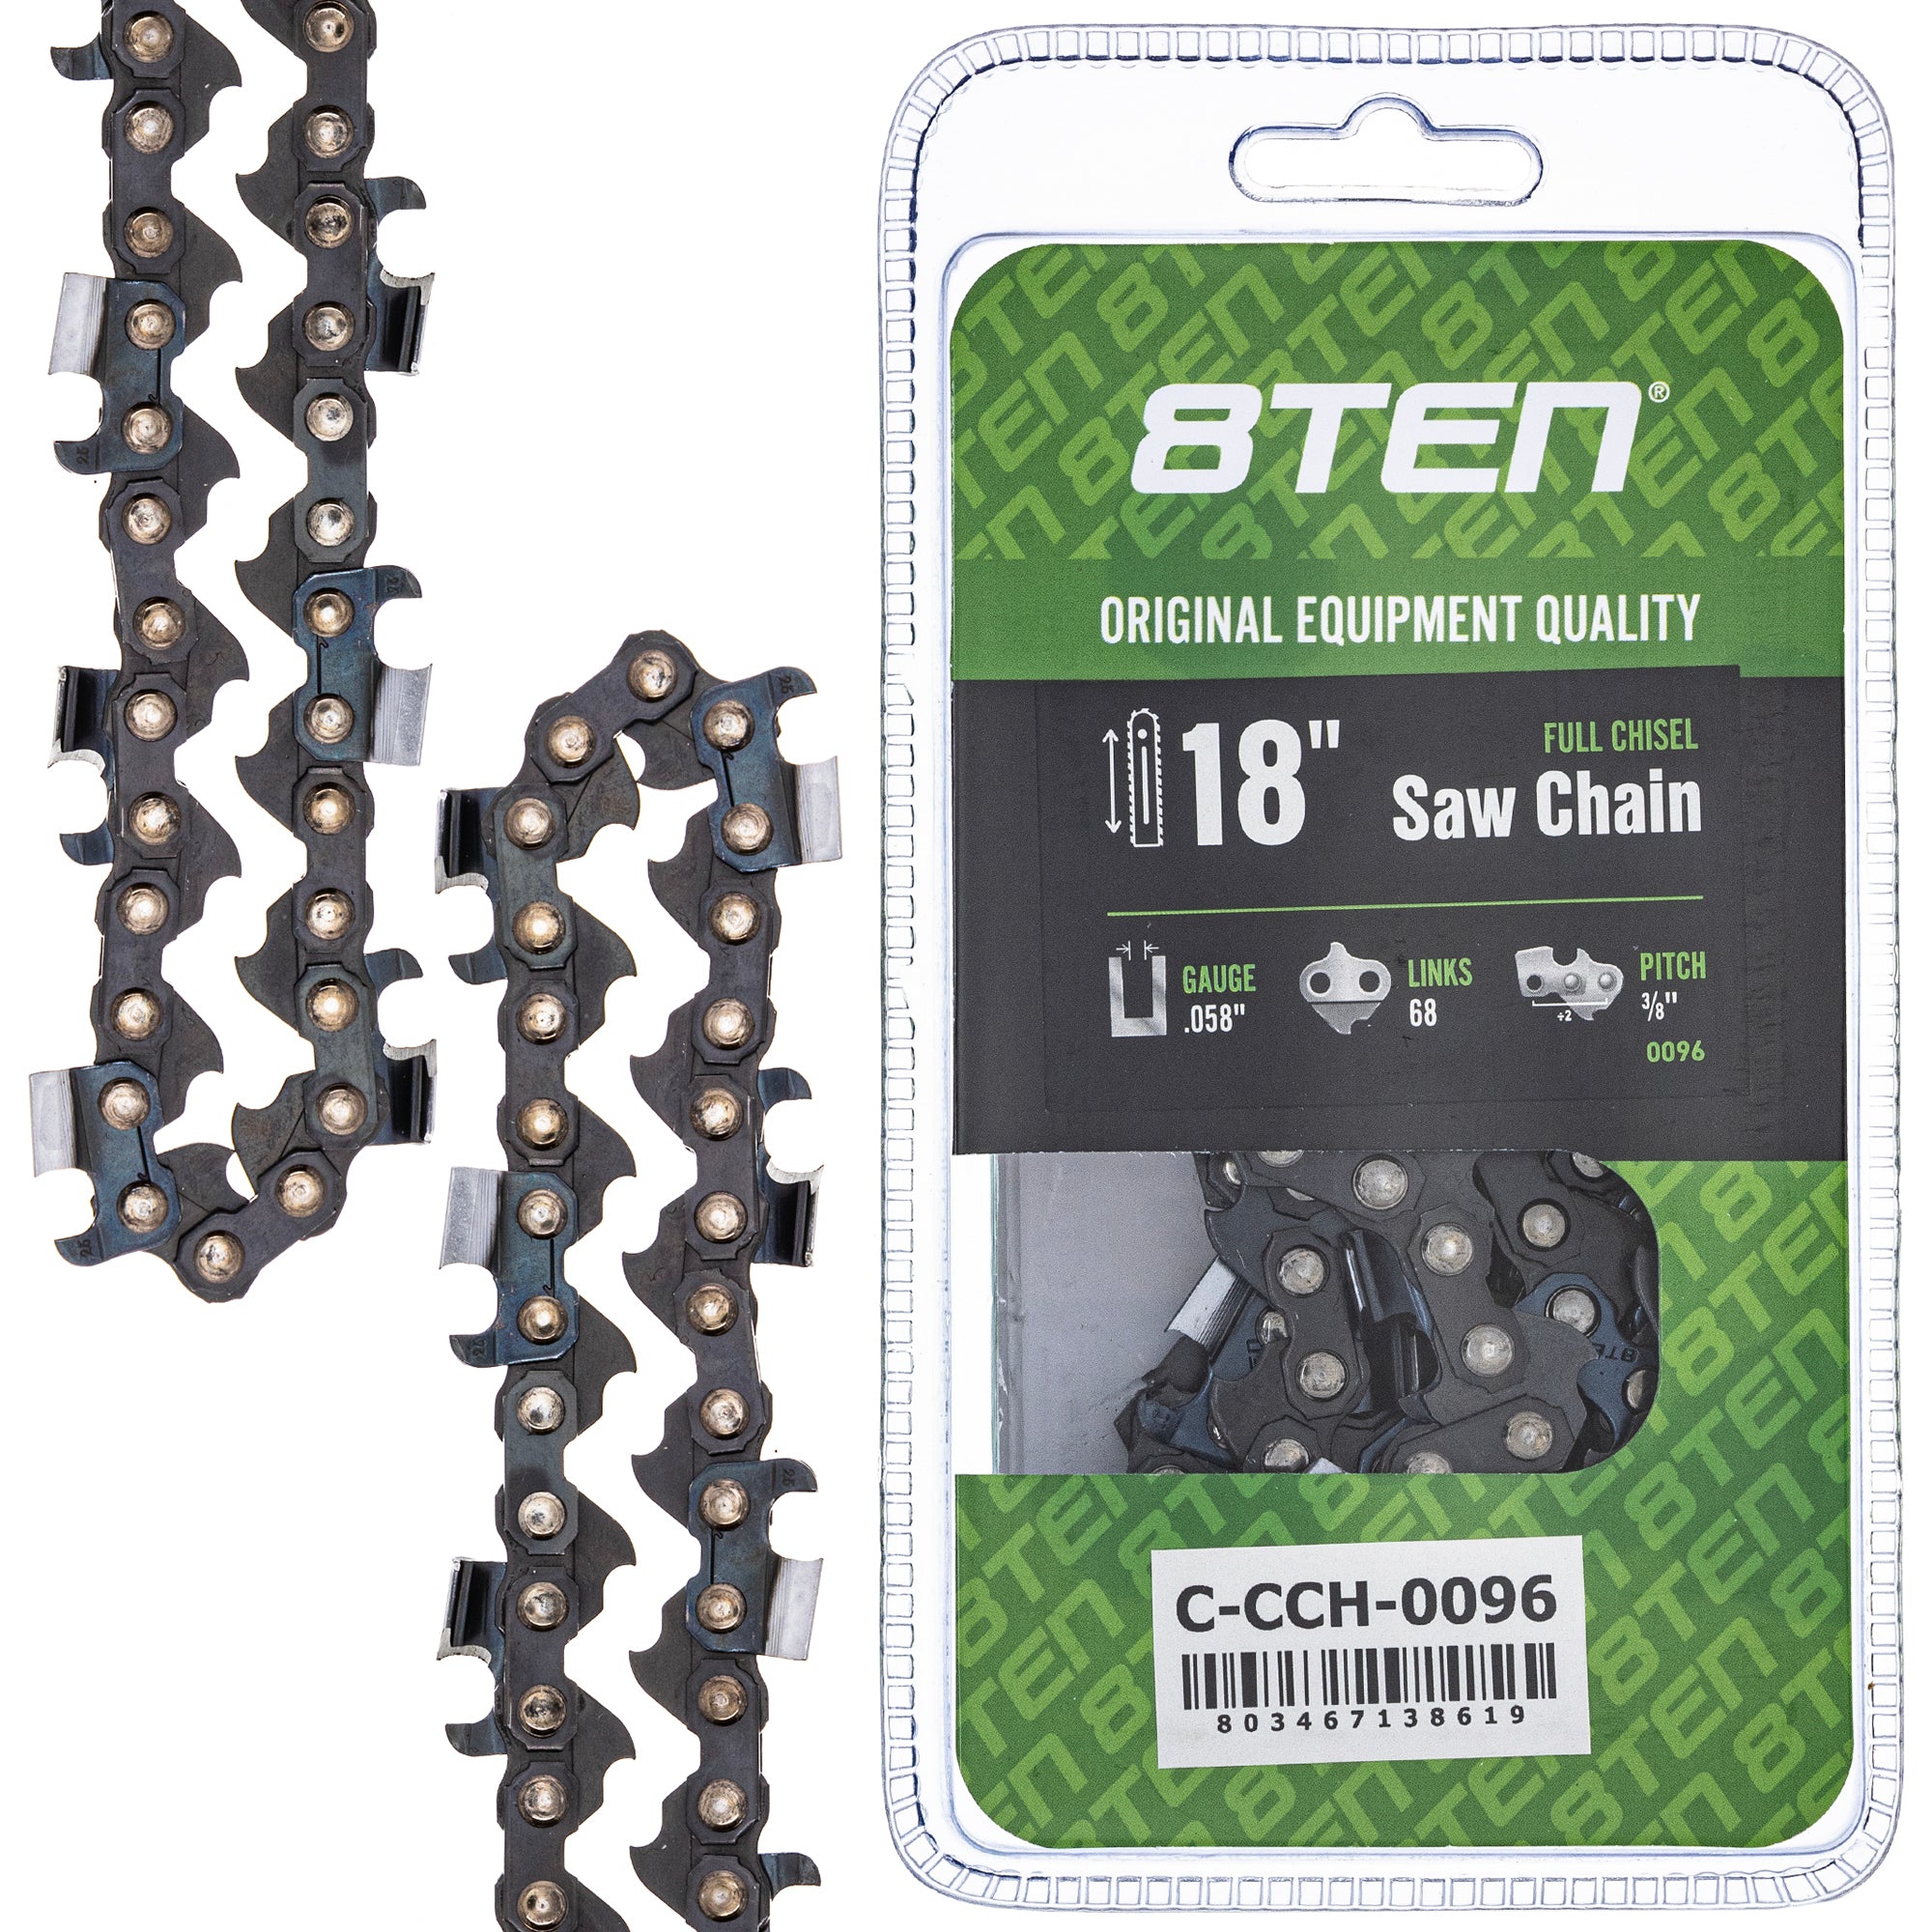 8TEN MK1010386 Guide Bar & Chain for S-65 S-55 S-50 R-440